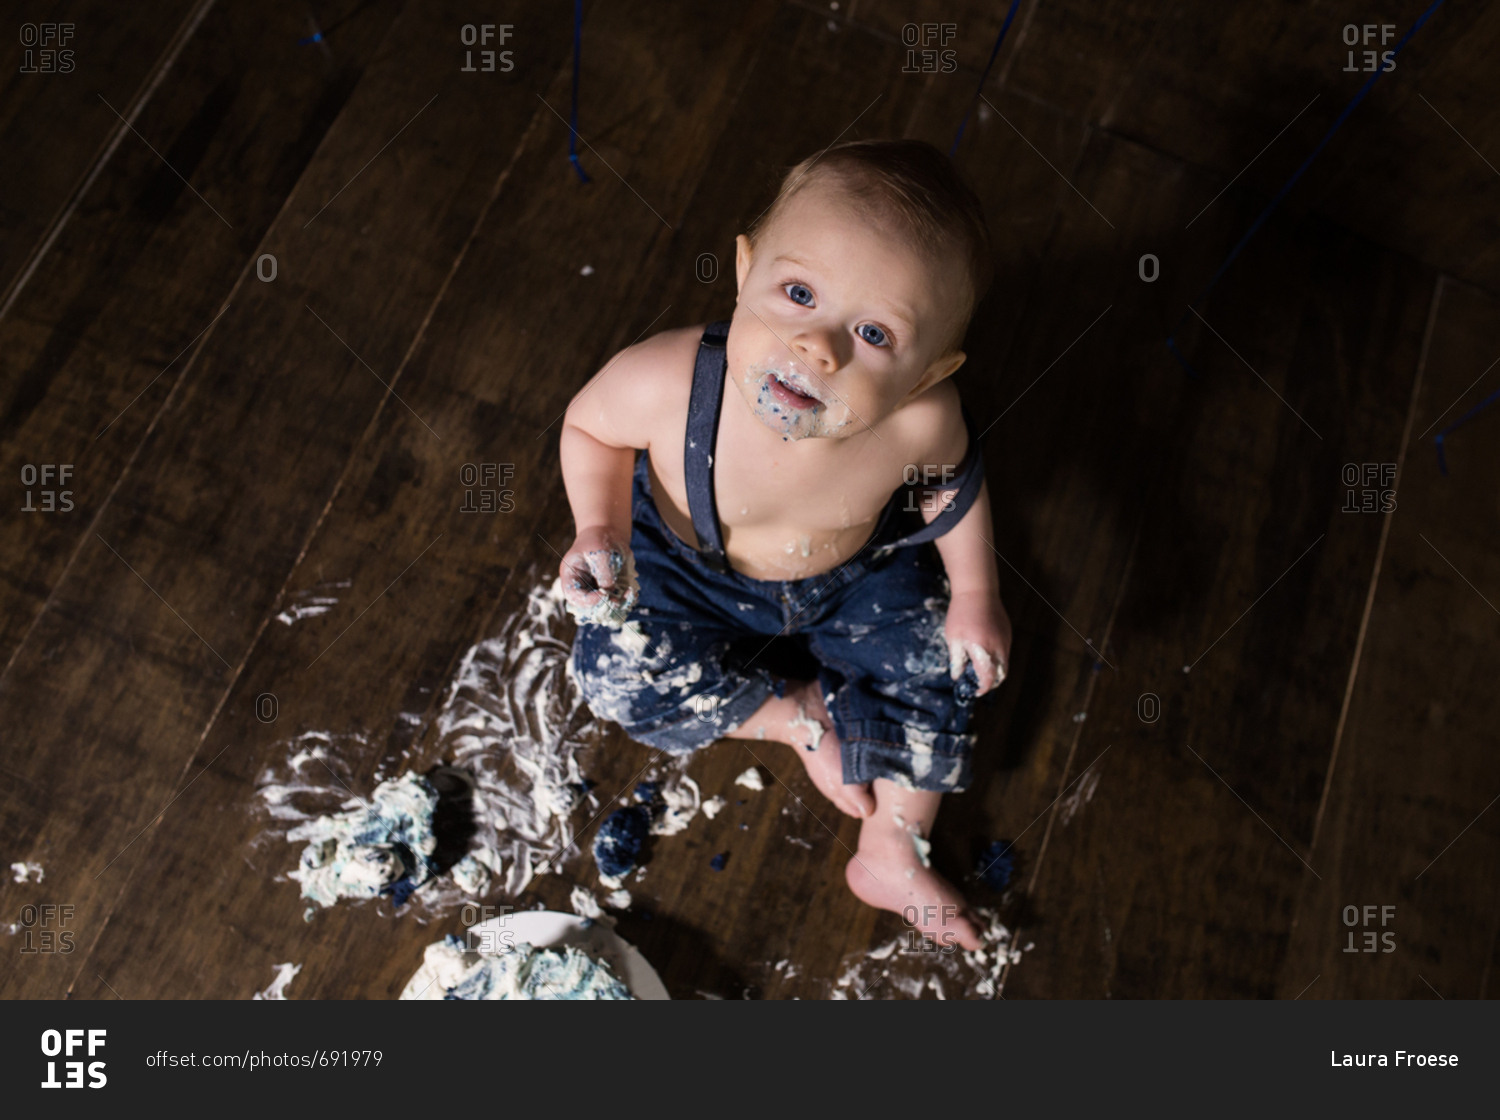 Baby boy covered in mess from birthday smash cake